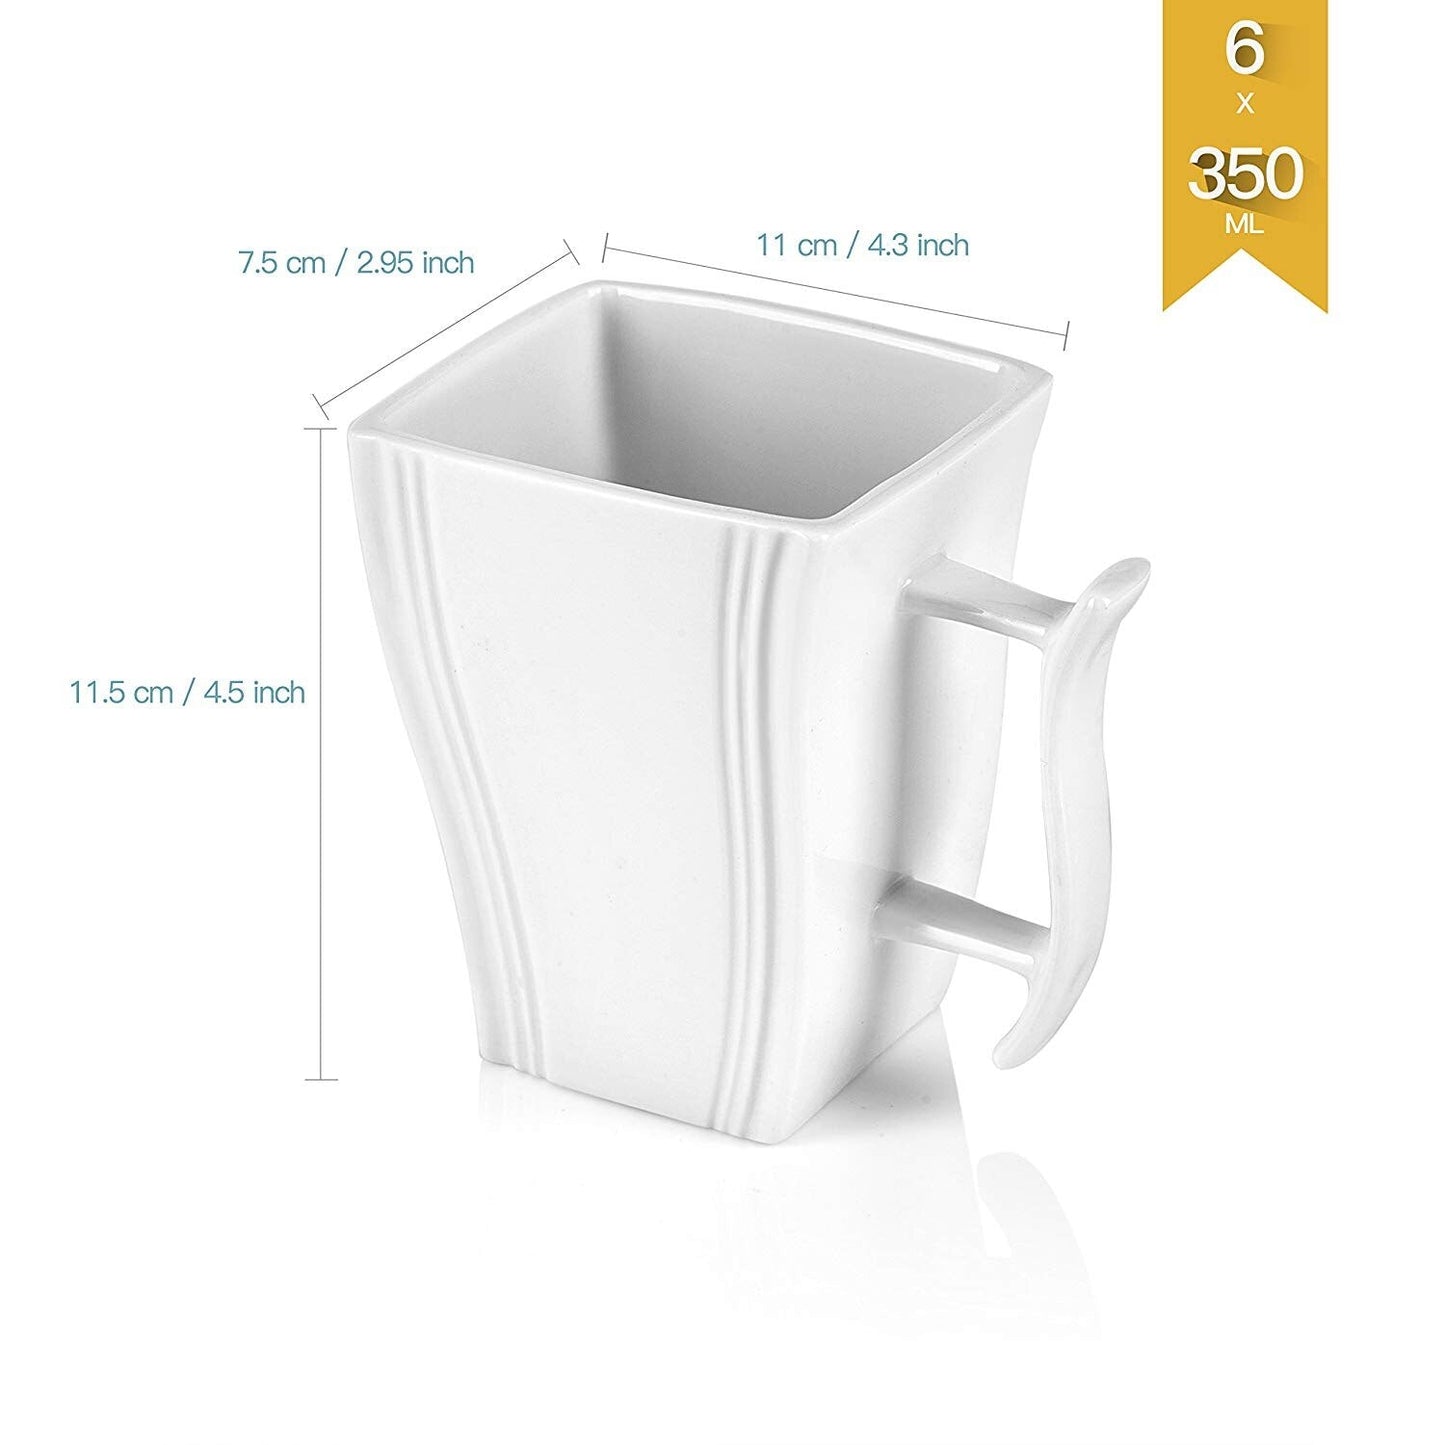 Flora Series 6-Piece 11.5 OZ Ivory White Square Porcelain Cups 4.5" - Nordic Side - 115, 45, Ceramic, China, Cream, Cups, Flora, Ivory, MALACASA, Mugs, OZ, Piece, Porcelain, Series, Square, W